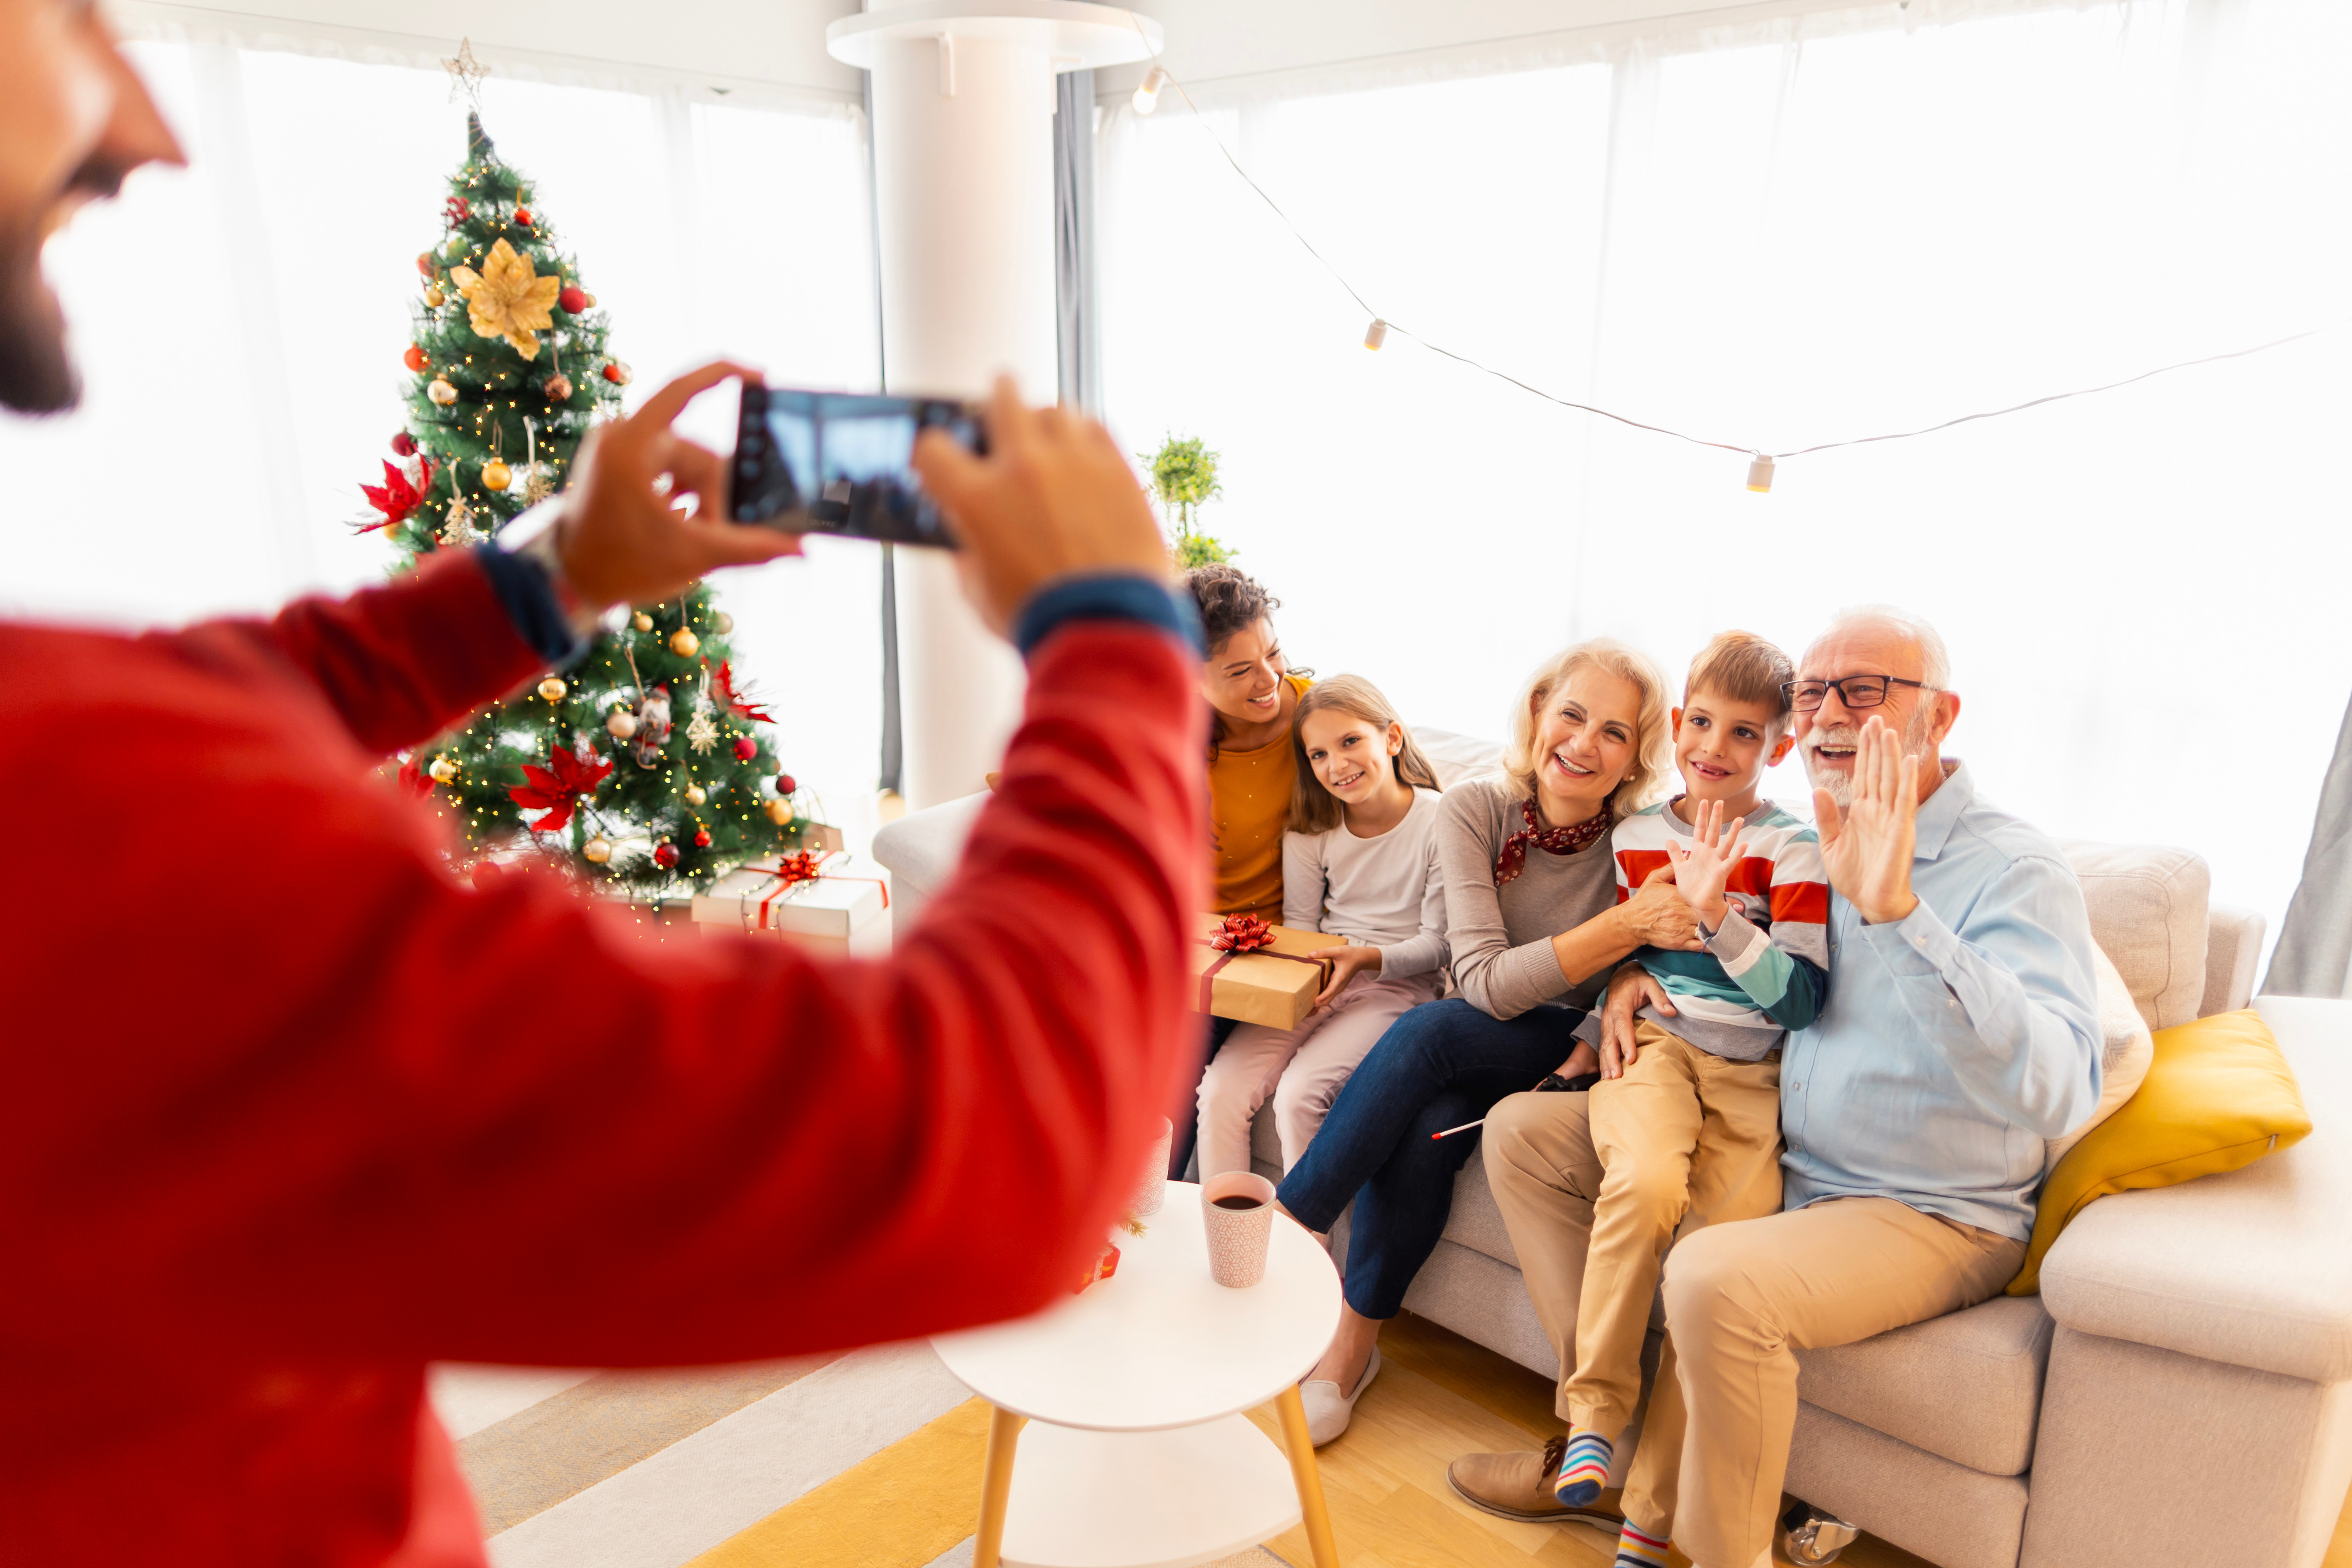 Holiday How-To's With Senior Loved Ones